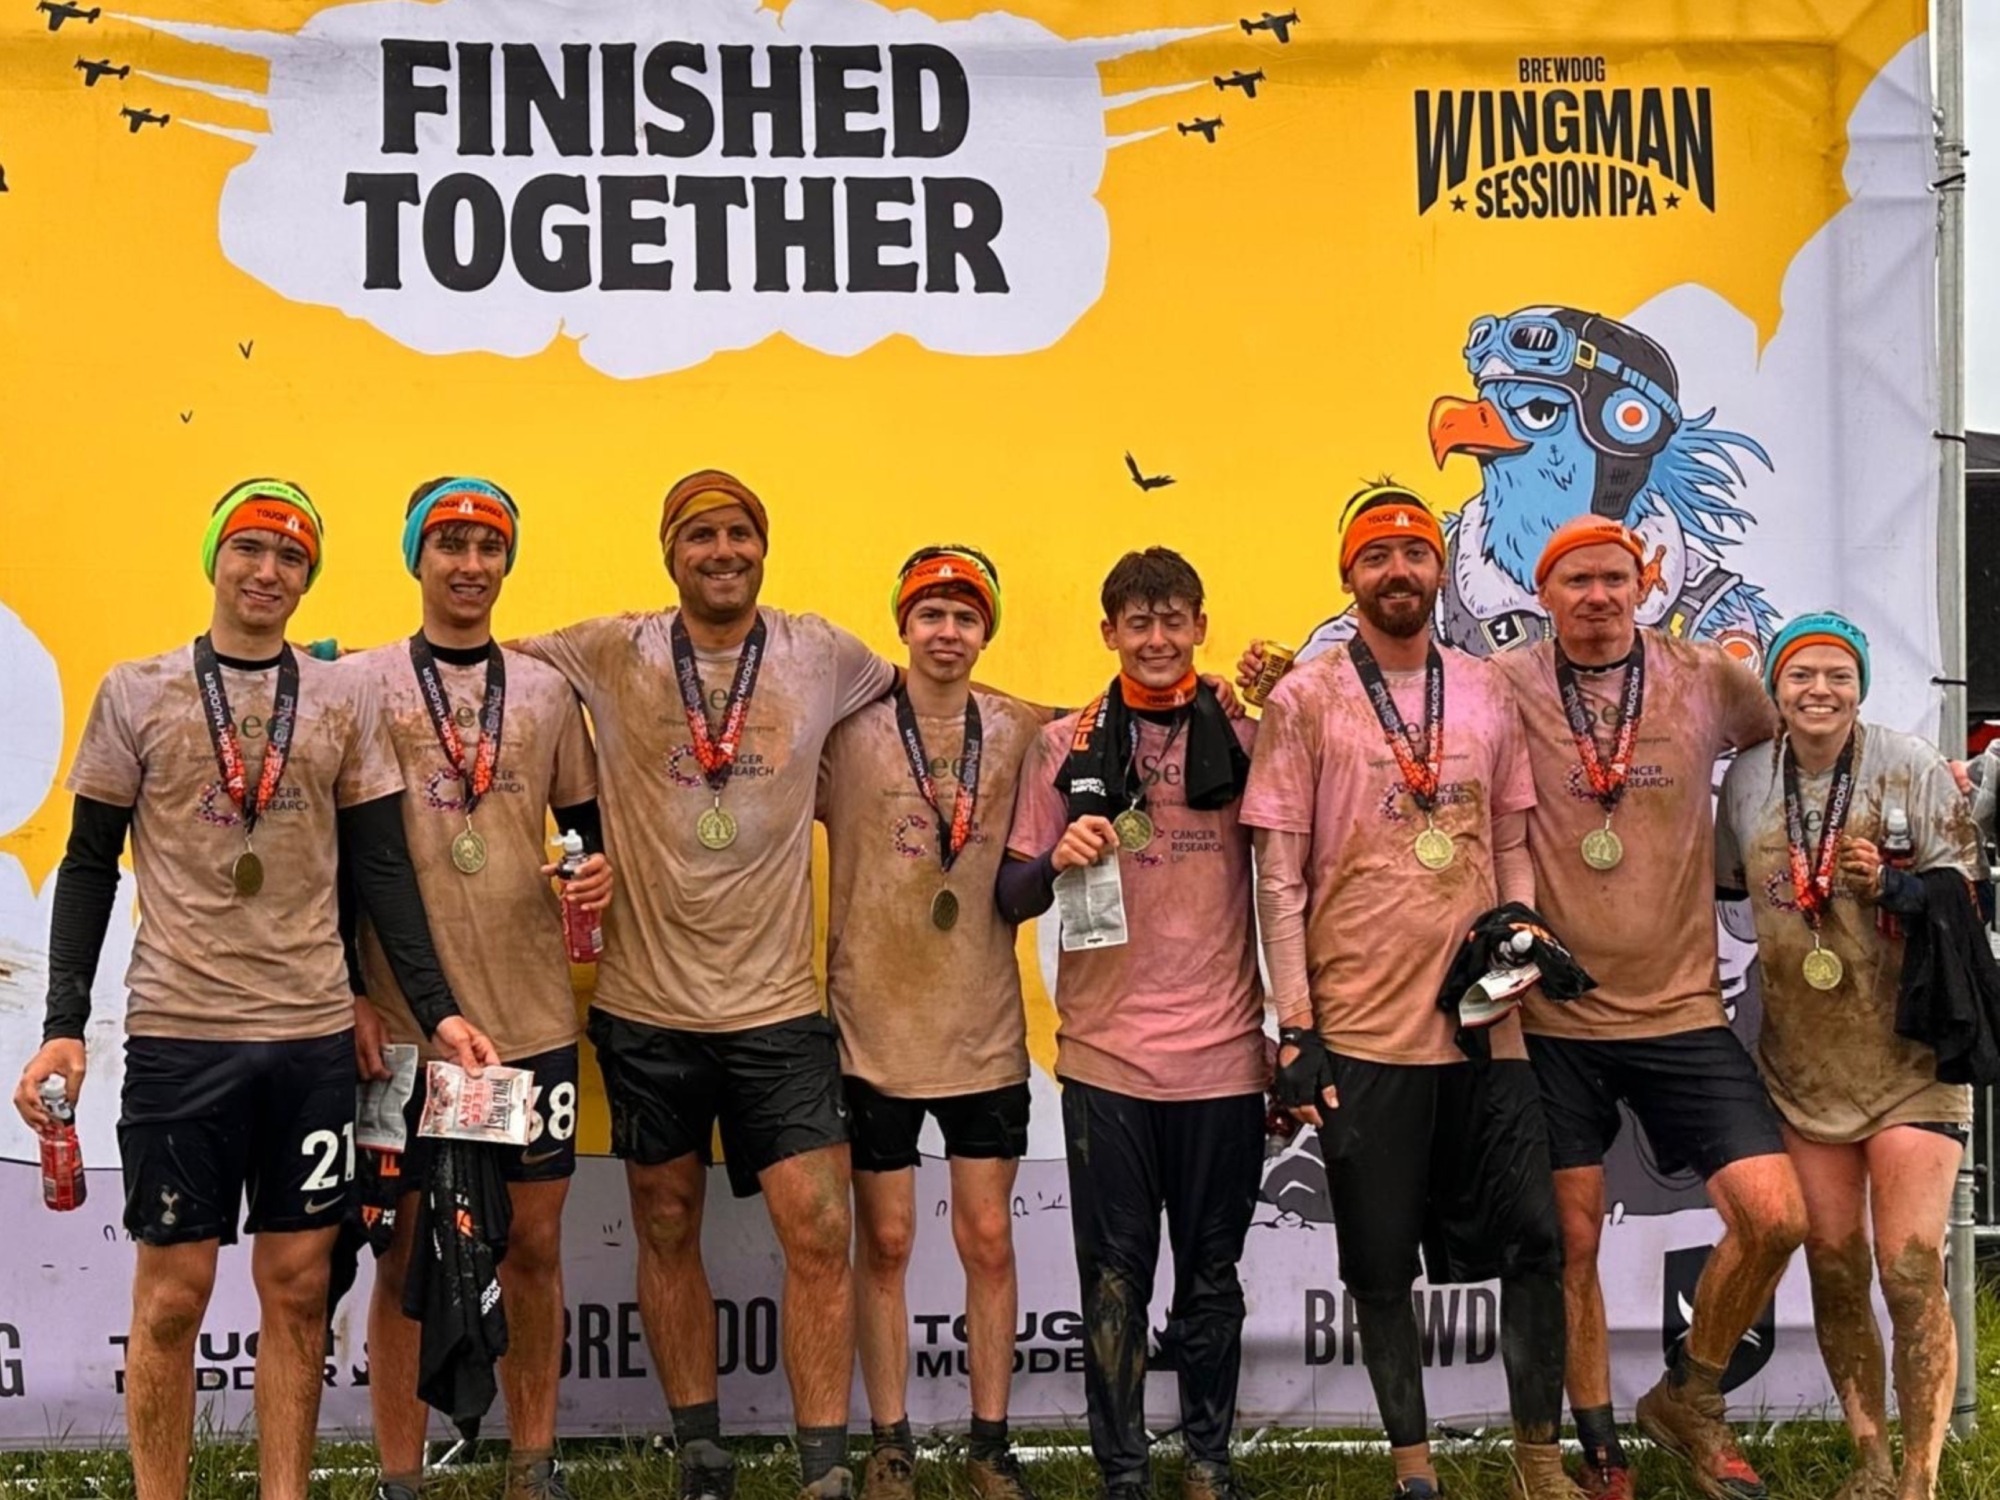 Local company raises more than £5,000 for Cancer Research UK in gruelling Tough Mudder challenge | Northamptonshire Chamber of Commerce